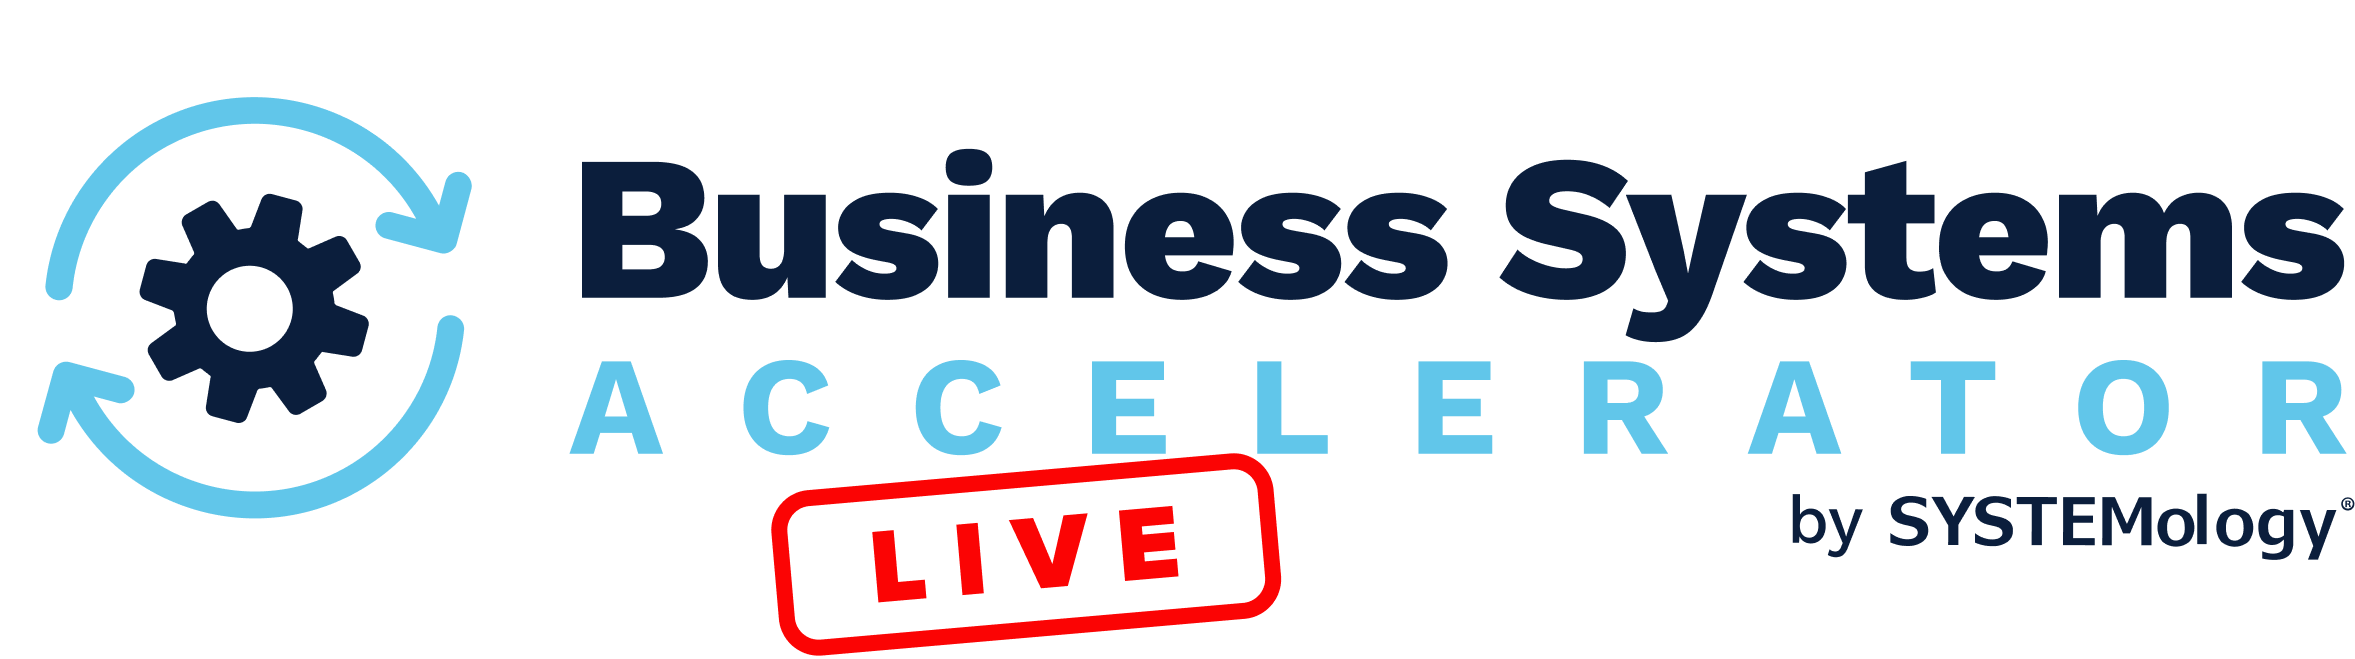 Business Systems Accelerator LIVE logo